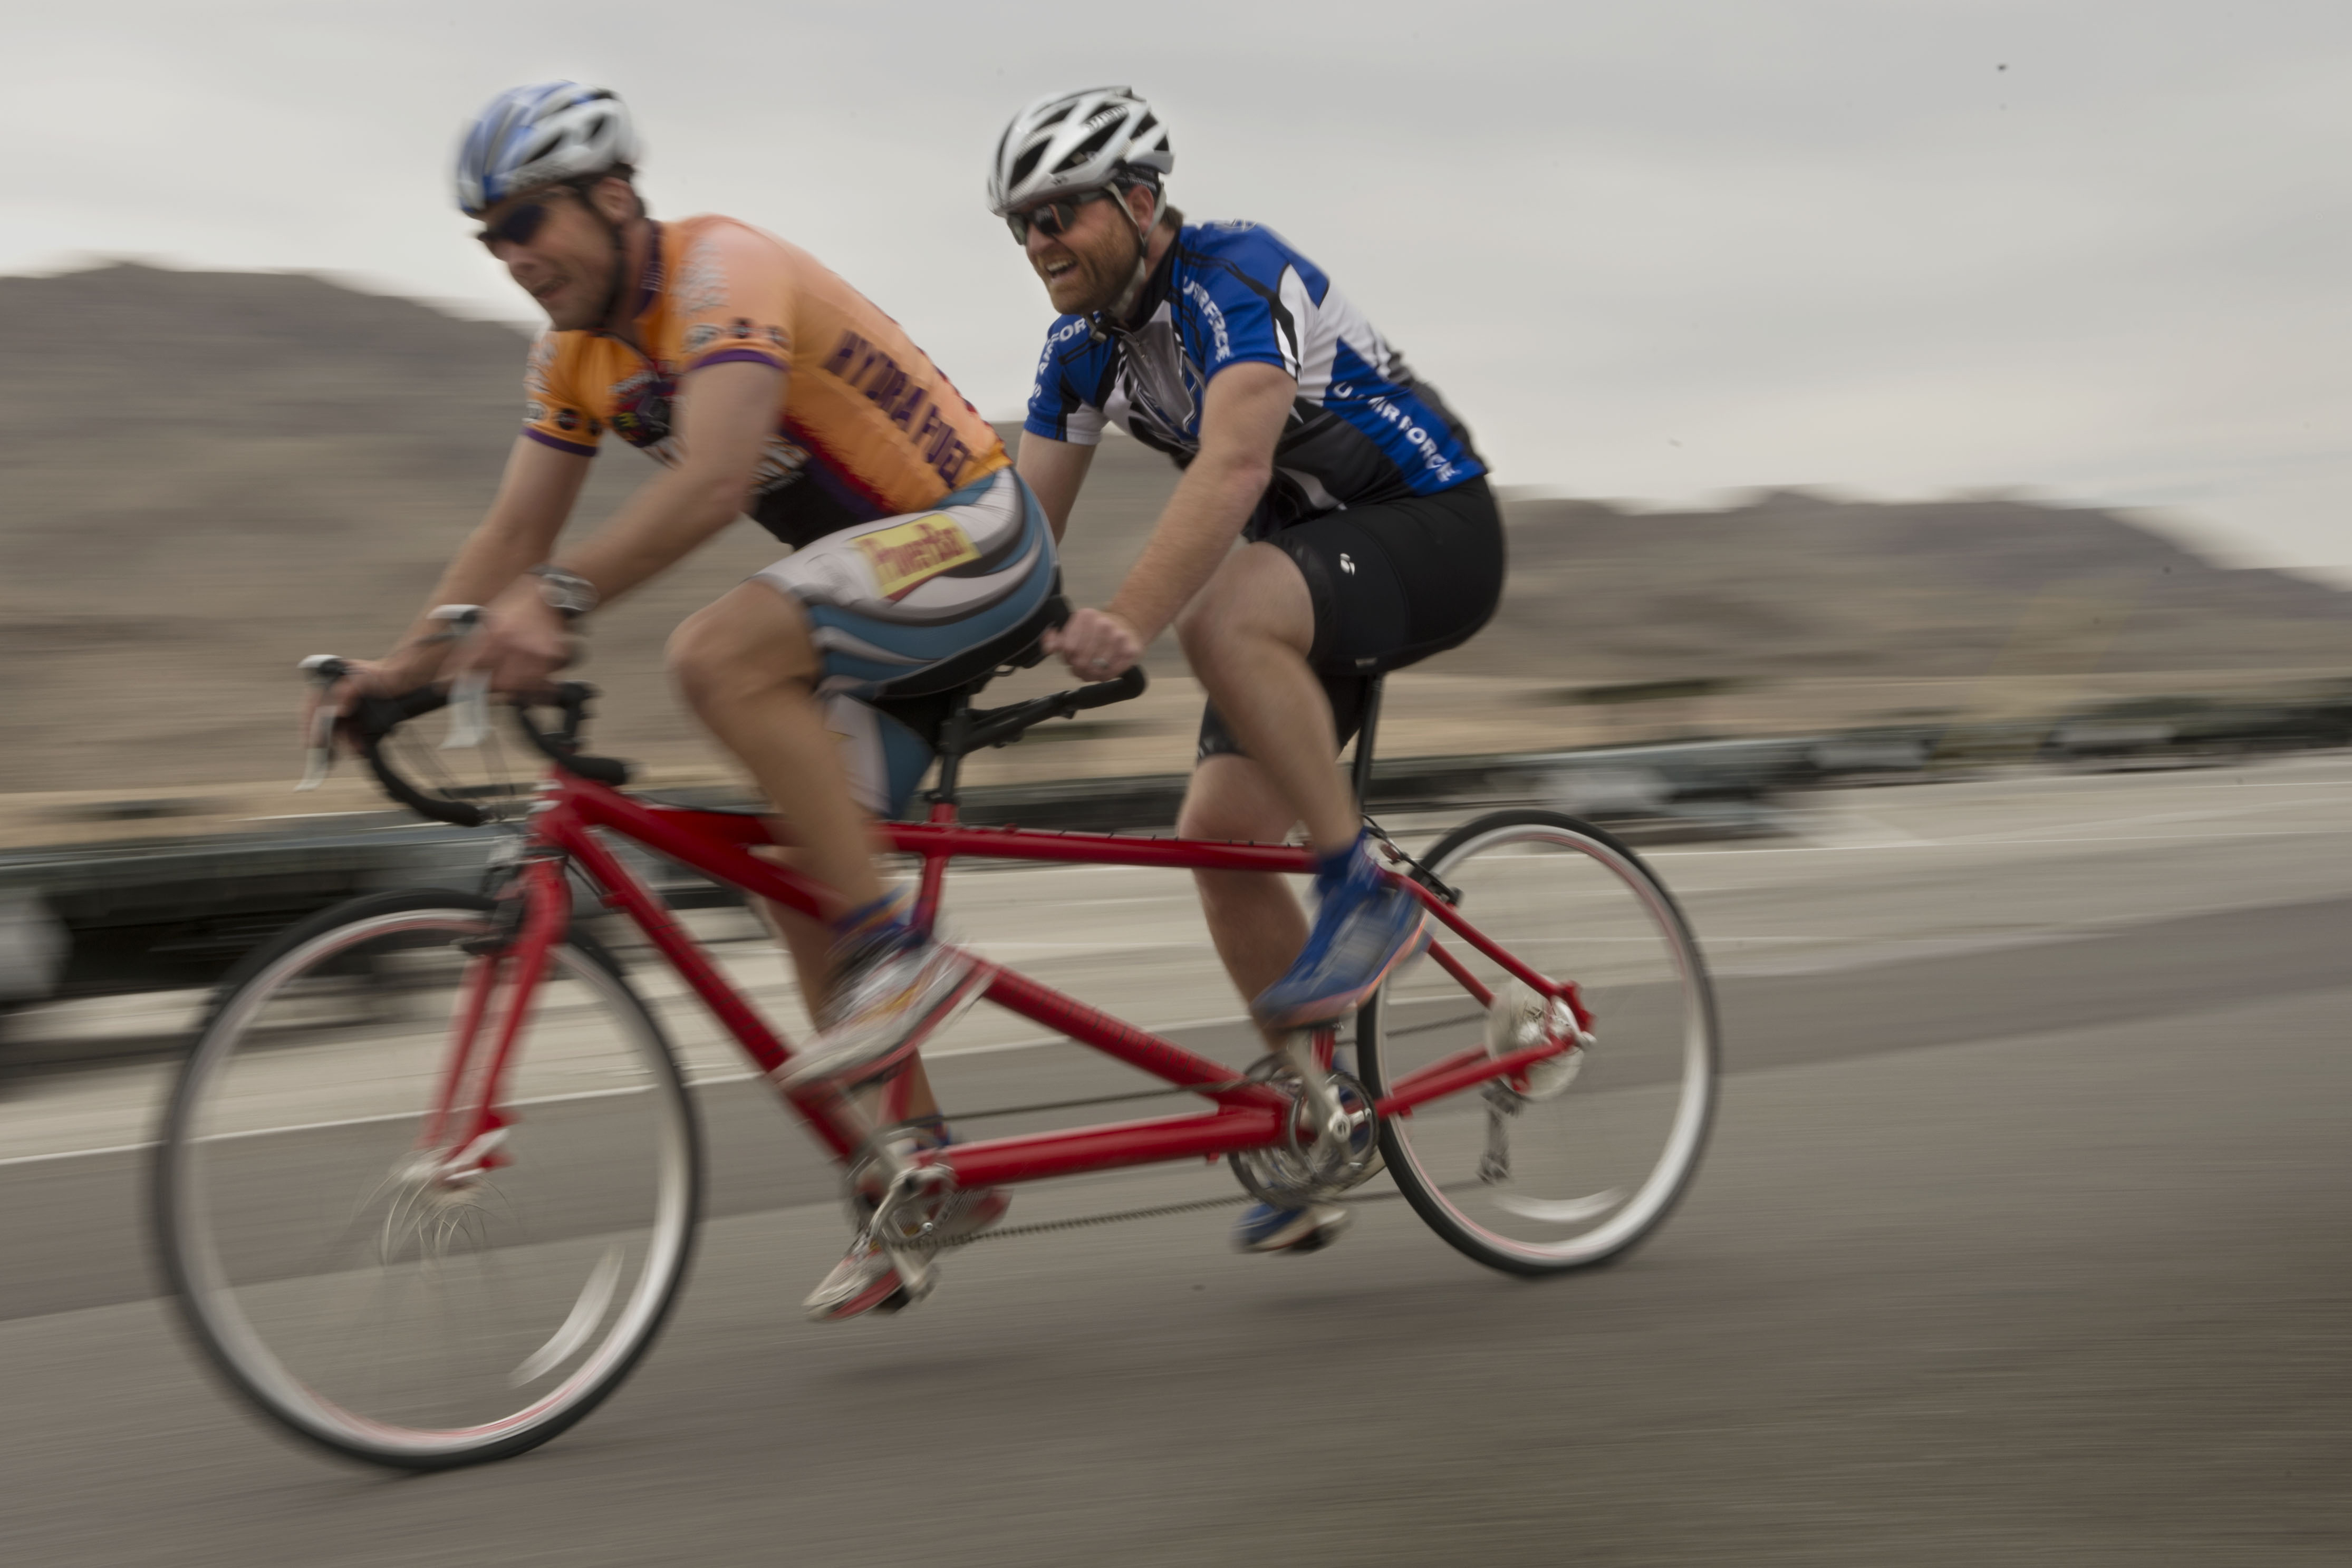 Warrior athletes gear up during cycling competition > U.S. Air Force ...